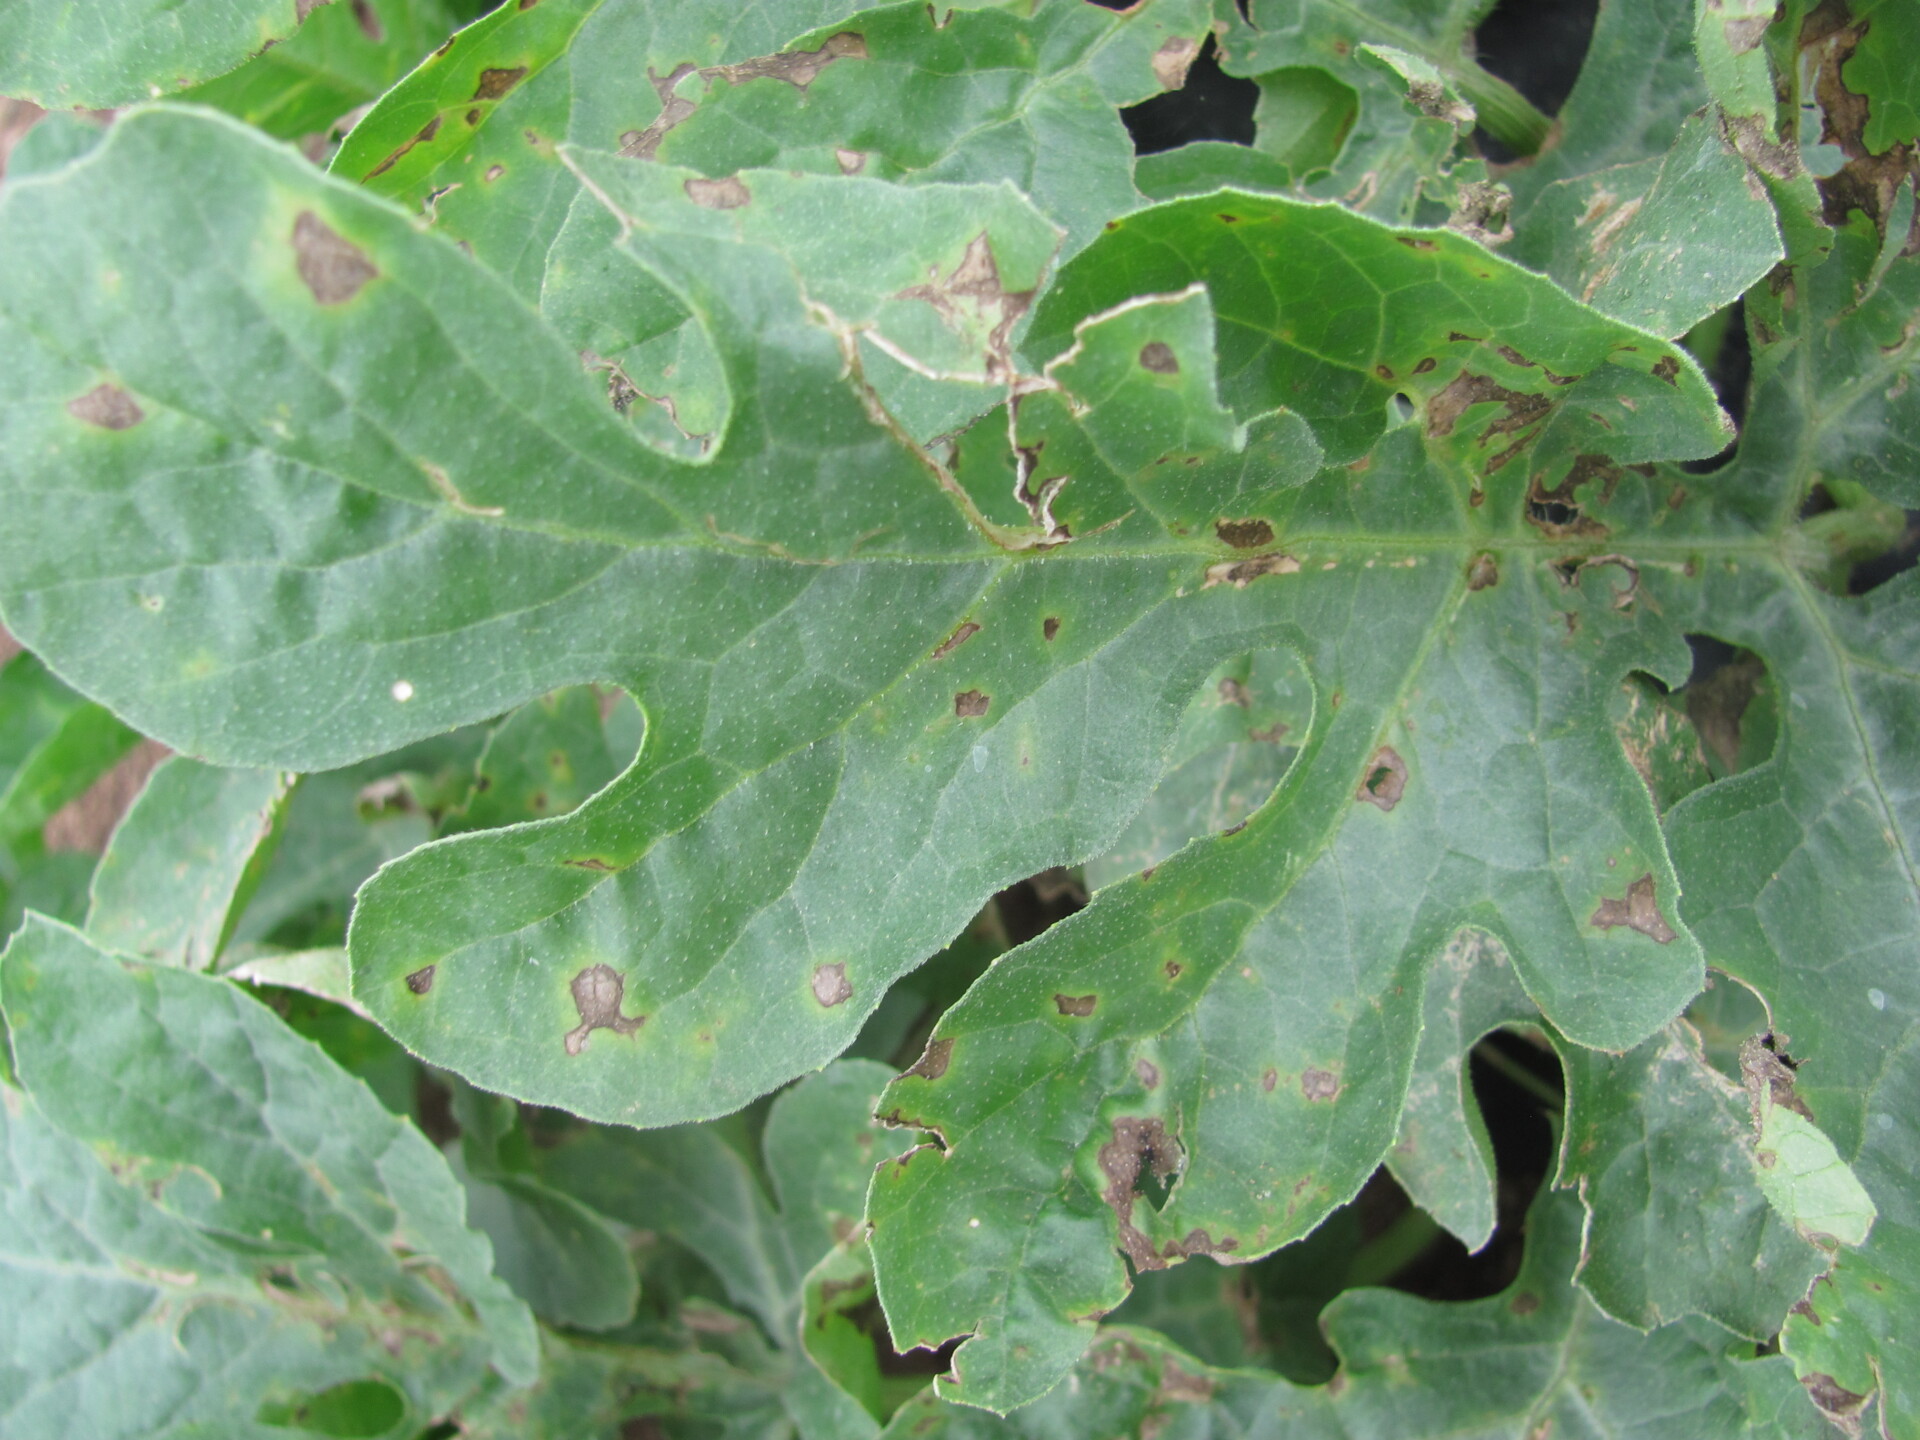 Leaf lesions of bacterial fruit blotch of watermelon